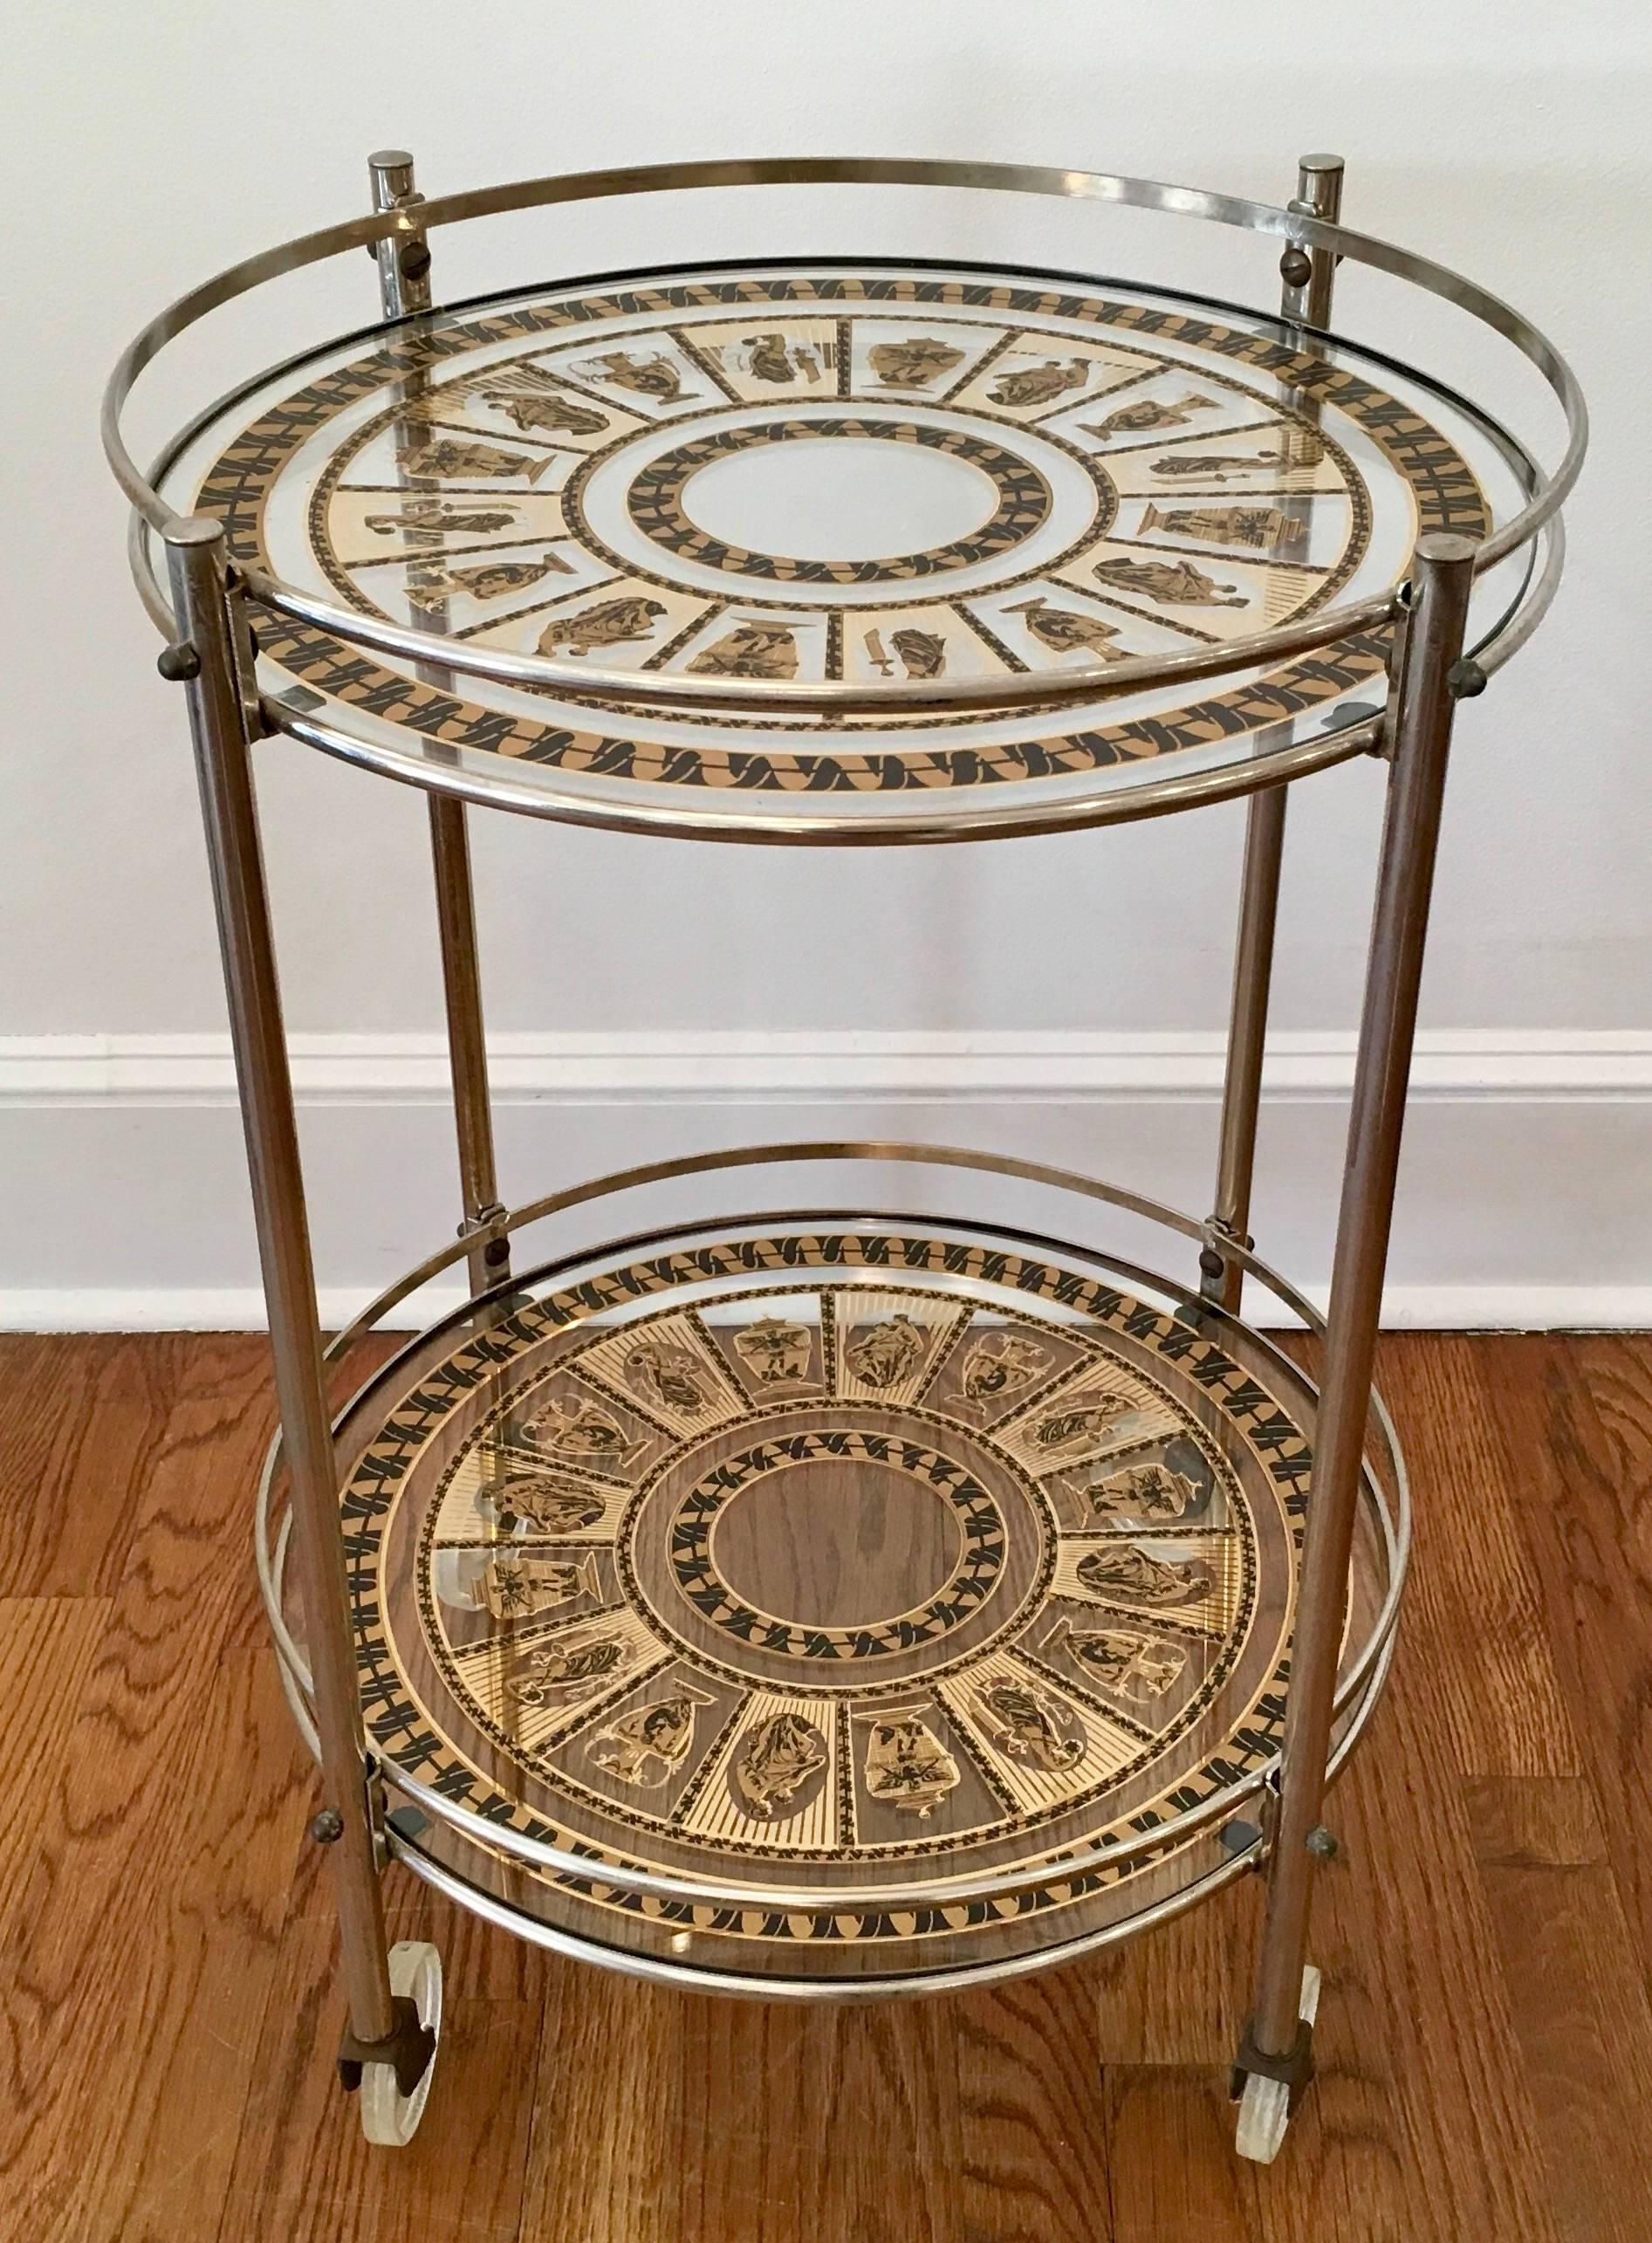 Delightful two-tiered bar or serving cart. The cart has stencilled black and gold alternating images of Greek vessels and Greek figures painted on glass. Chrome and glass cart has great appeal.